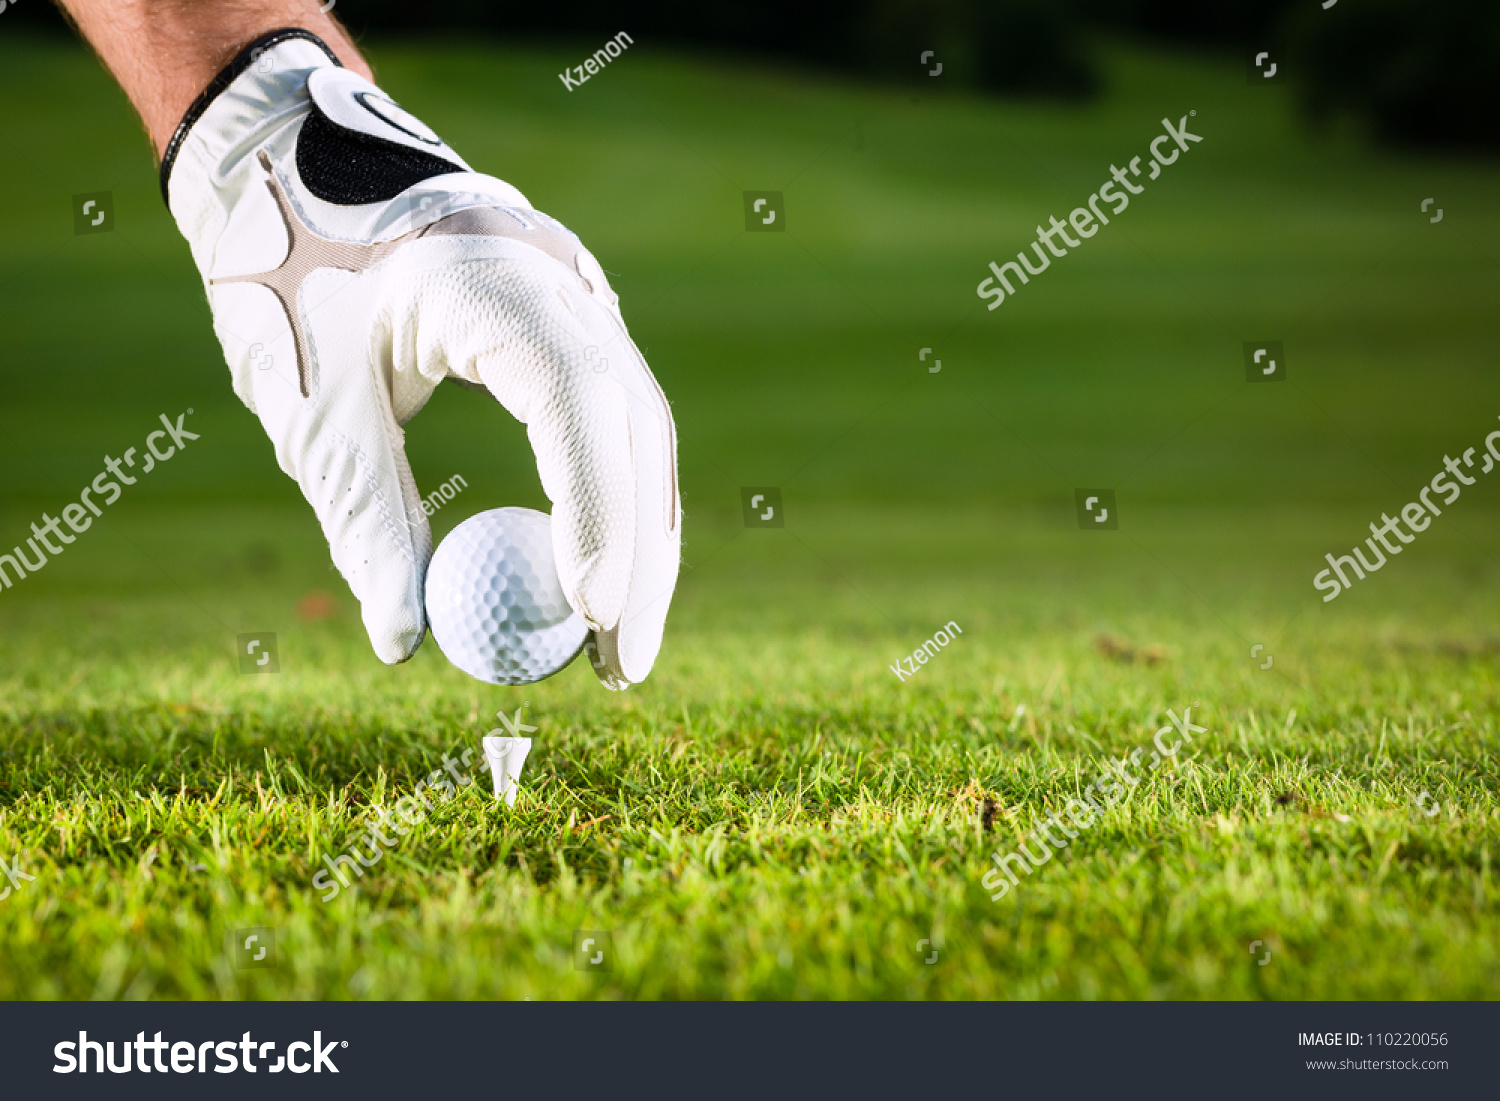 Hand hold golf ball with tee on course, close-up #110220056